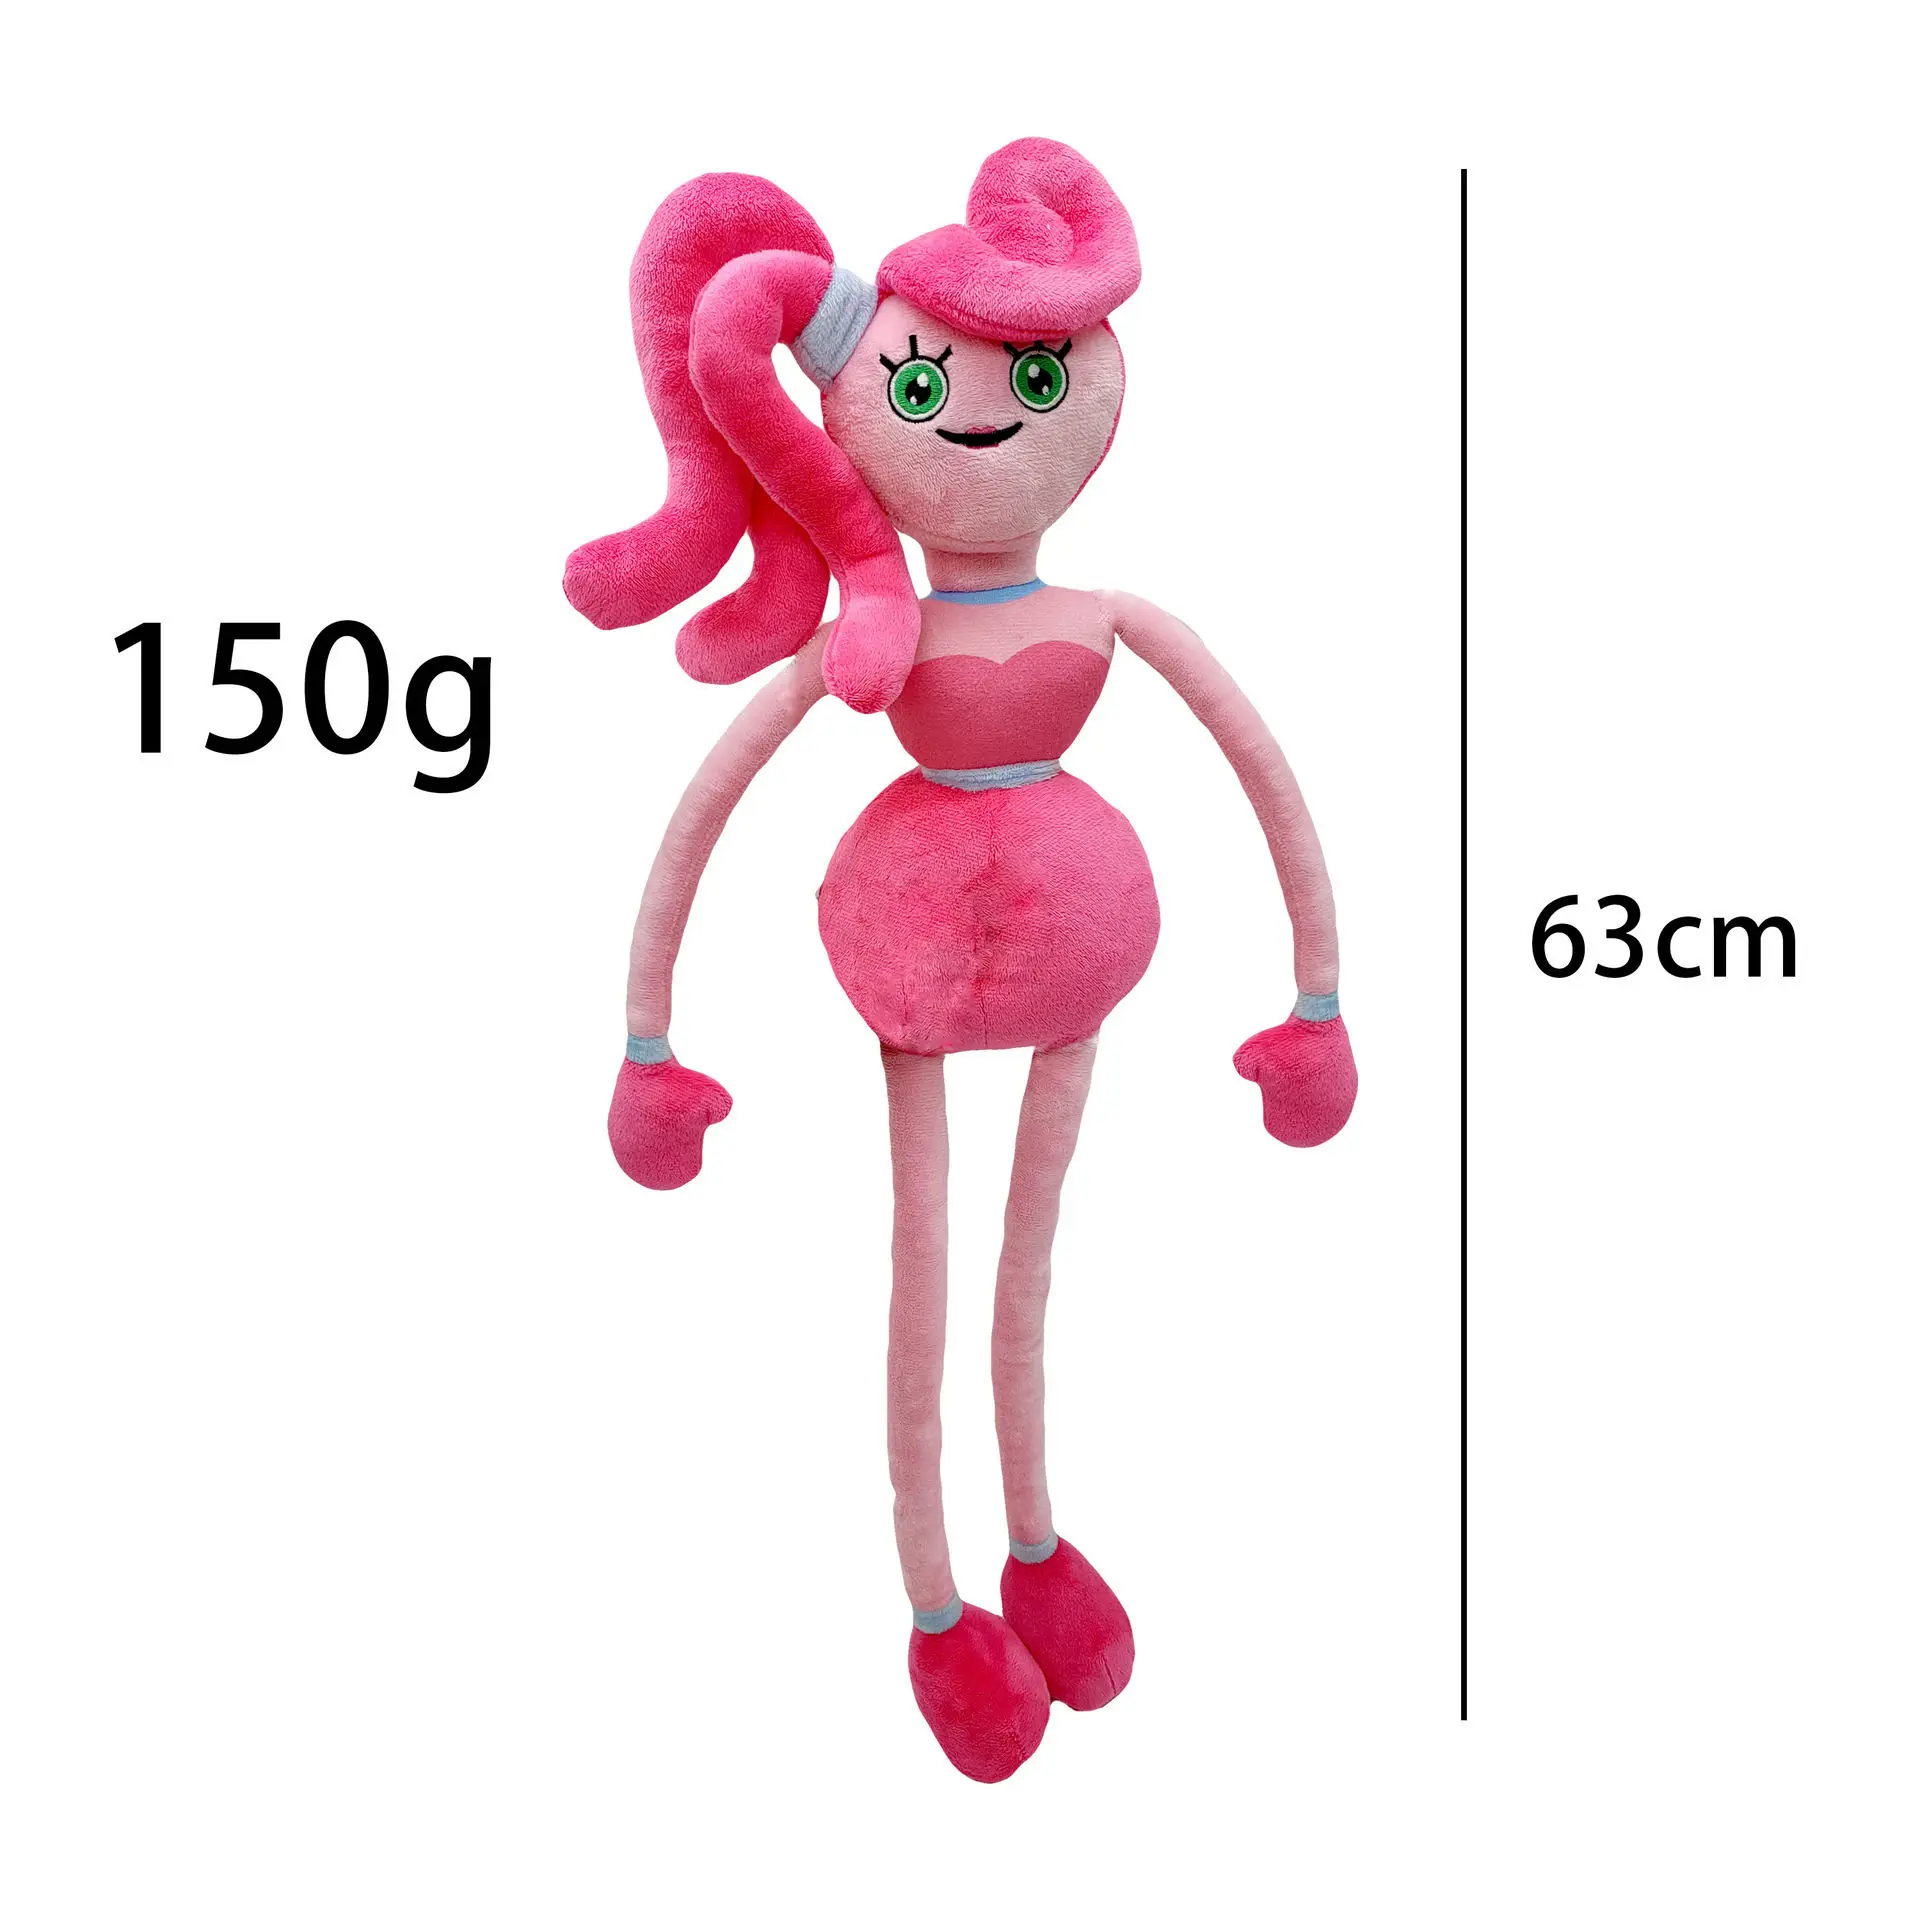 

New Poppy Playtime Chapter 2 Pillow MOMMY LONG LEGS Plush Doll Kawaii Cartoon Huggy Wuggy Plush Toy Room Decor Doll Girls Gifts